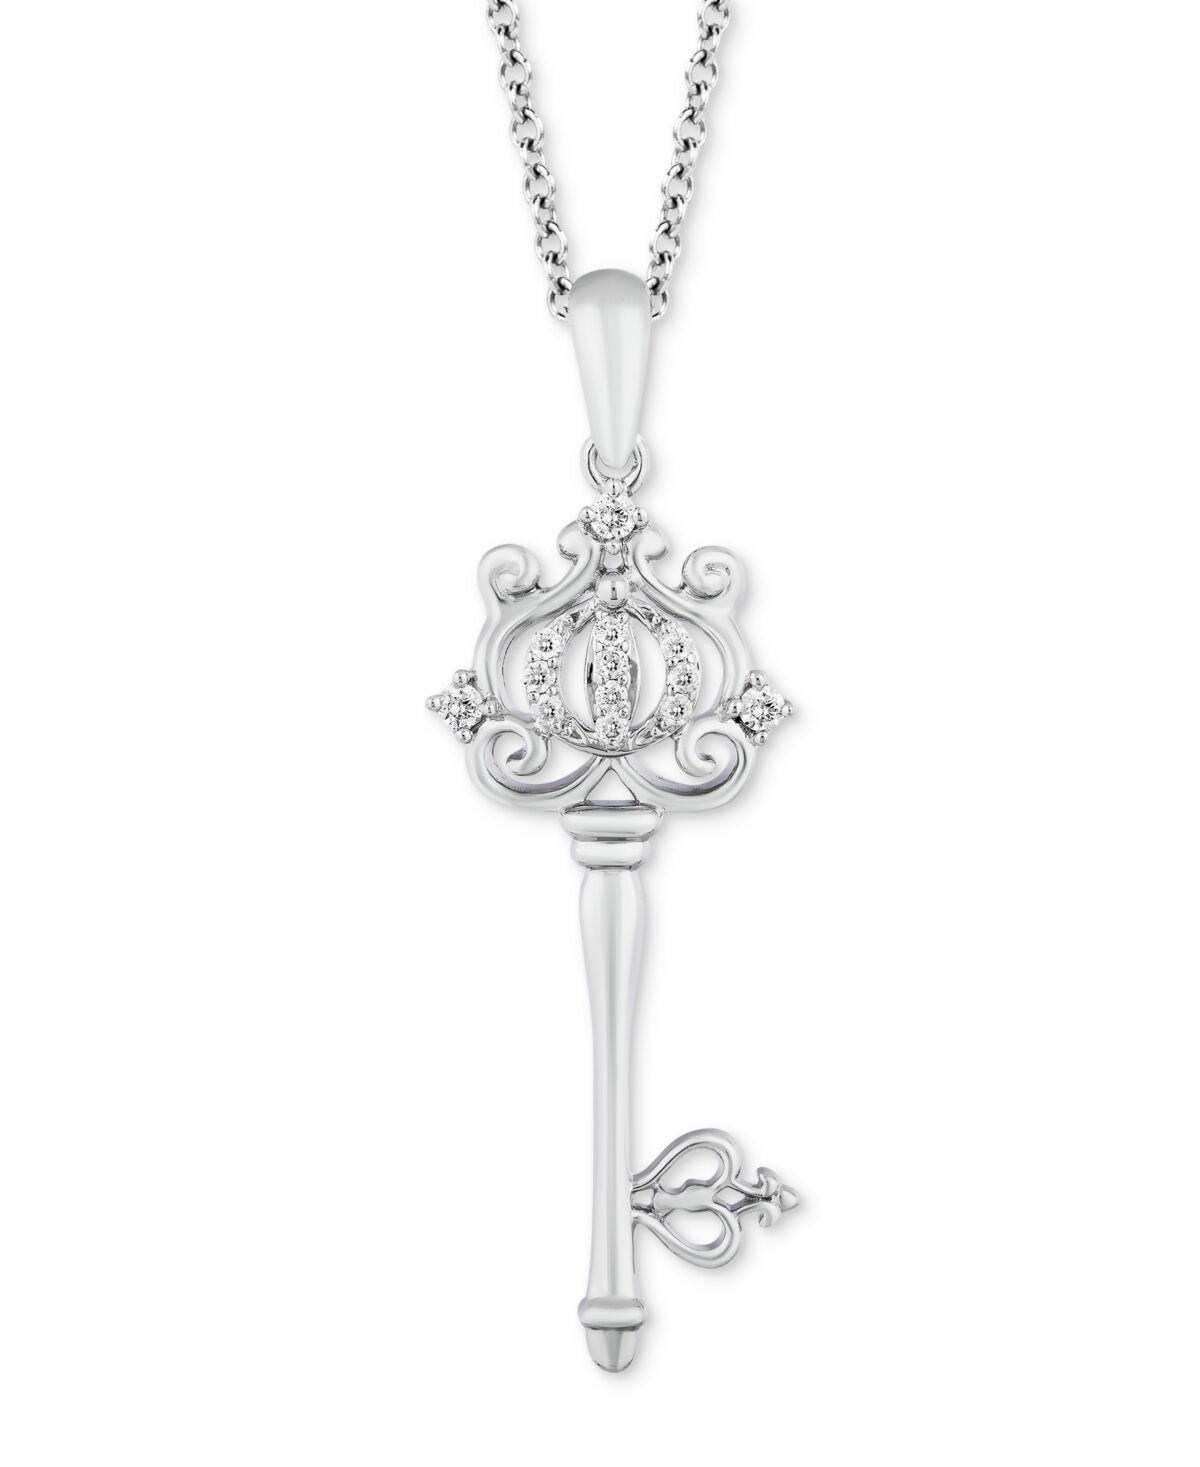 Disney Enchanted Disney Fine Jewelry Diamond Cinderella Carriage Key Pendant Necklace (1/10 ct. t.w.) in Sterling Silver, 16